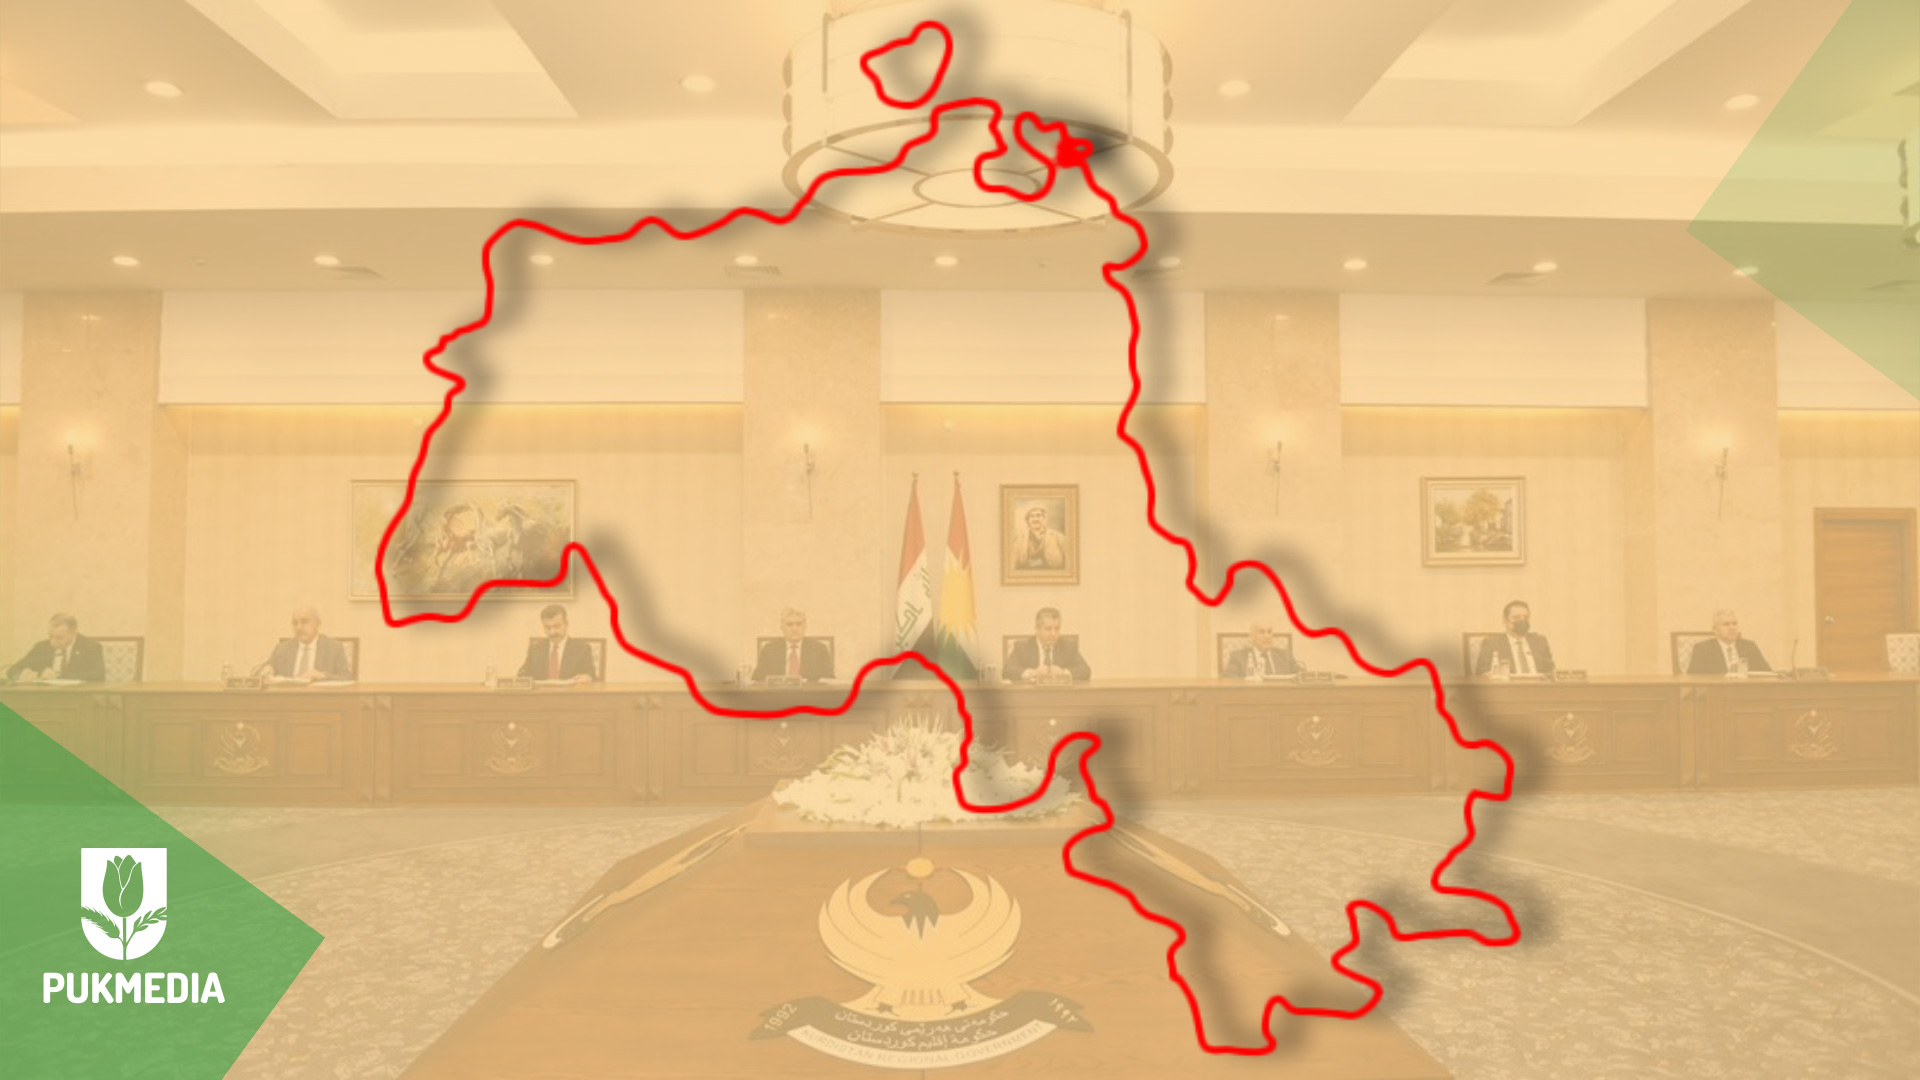  Kurdistan Region map and KRG 9th cabinet in the background.